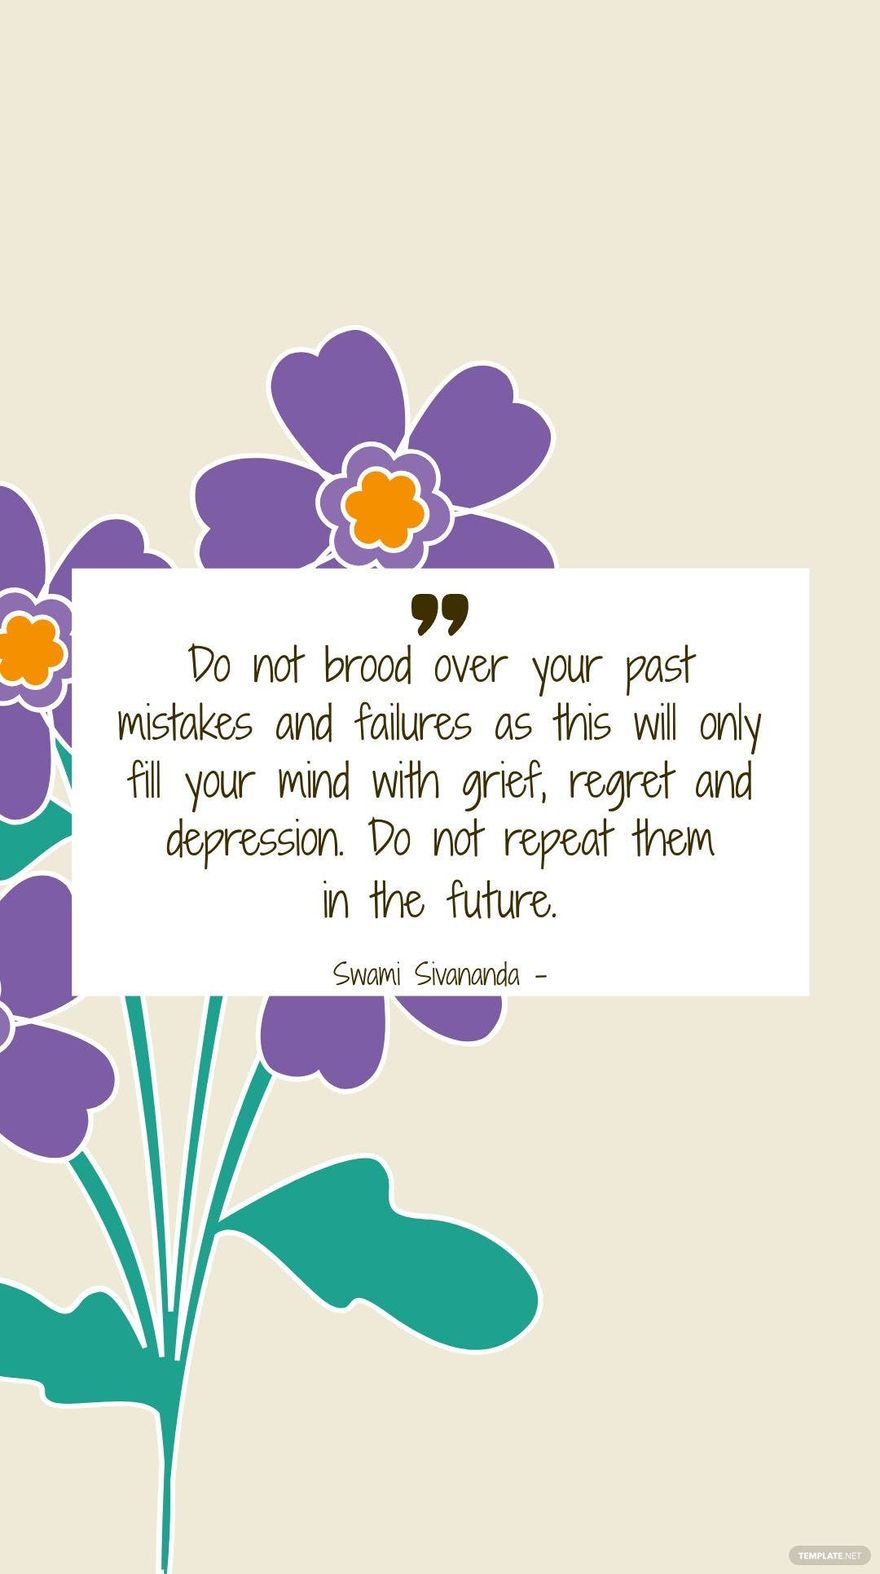 Swami Sivananda - Do not brood over your past mistakes and failures as this will only fill your mind with grief, regret and depression. Do not repeat them in the future.